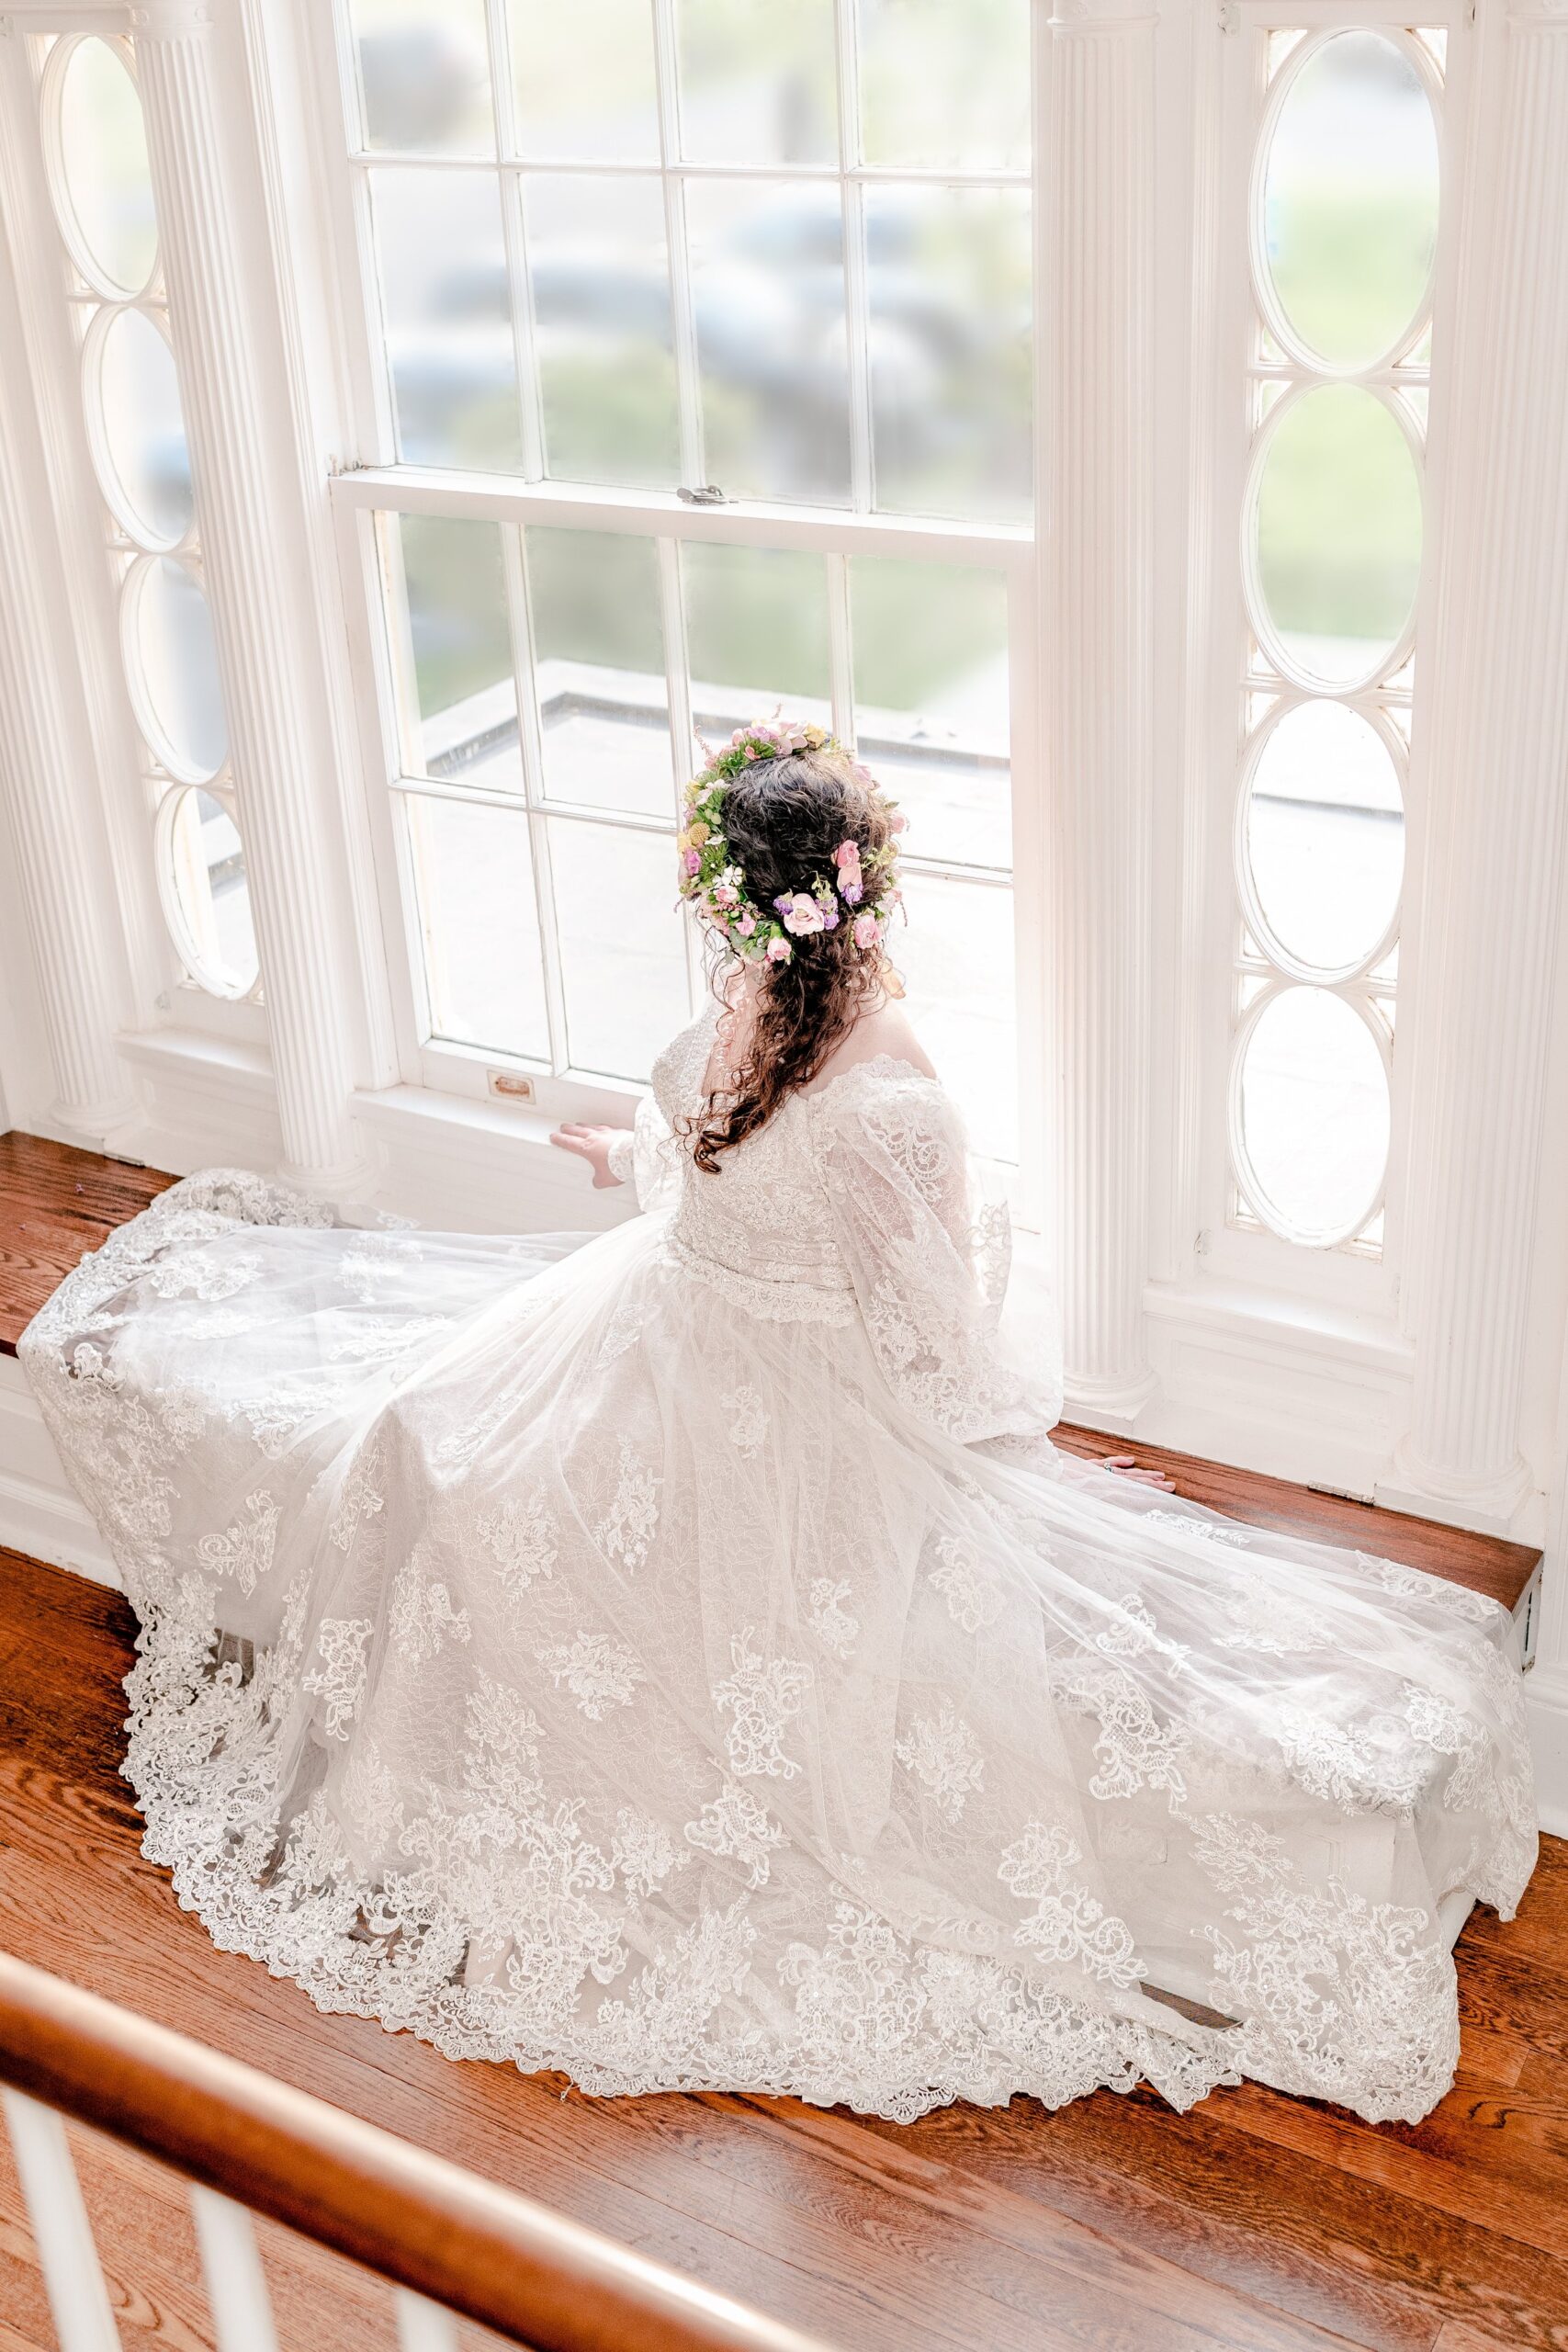 A bride gazing out the window of one of the best wedding venues in Northern Virginia